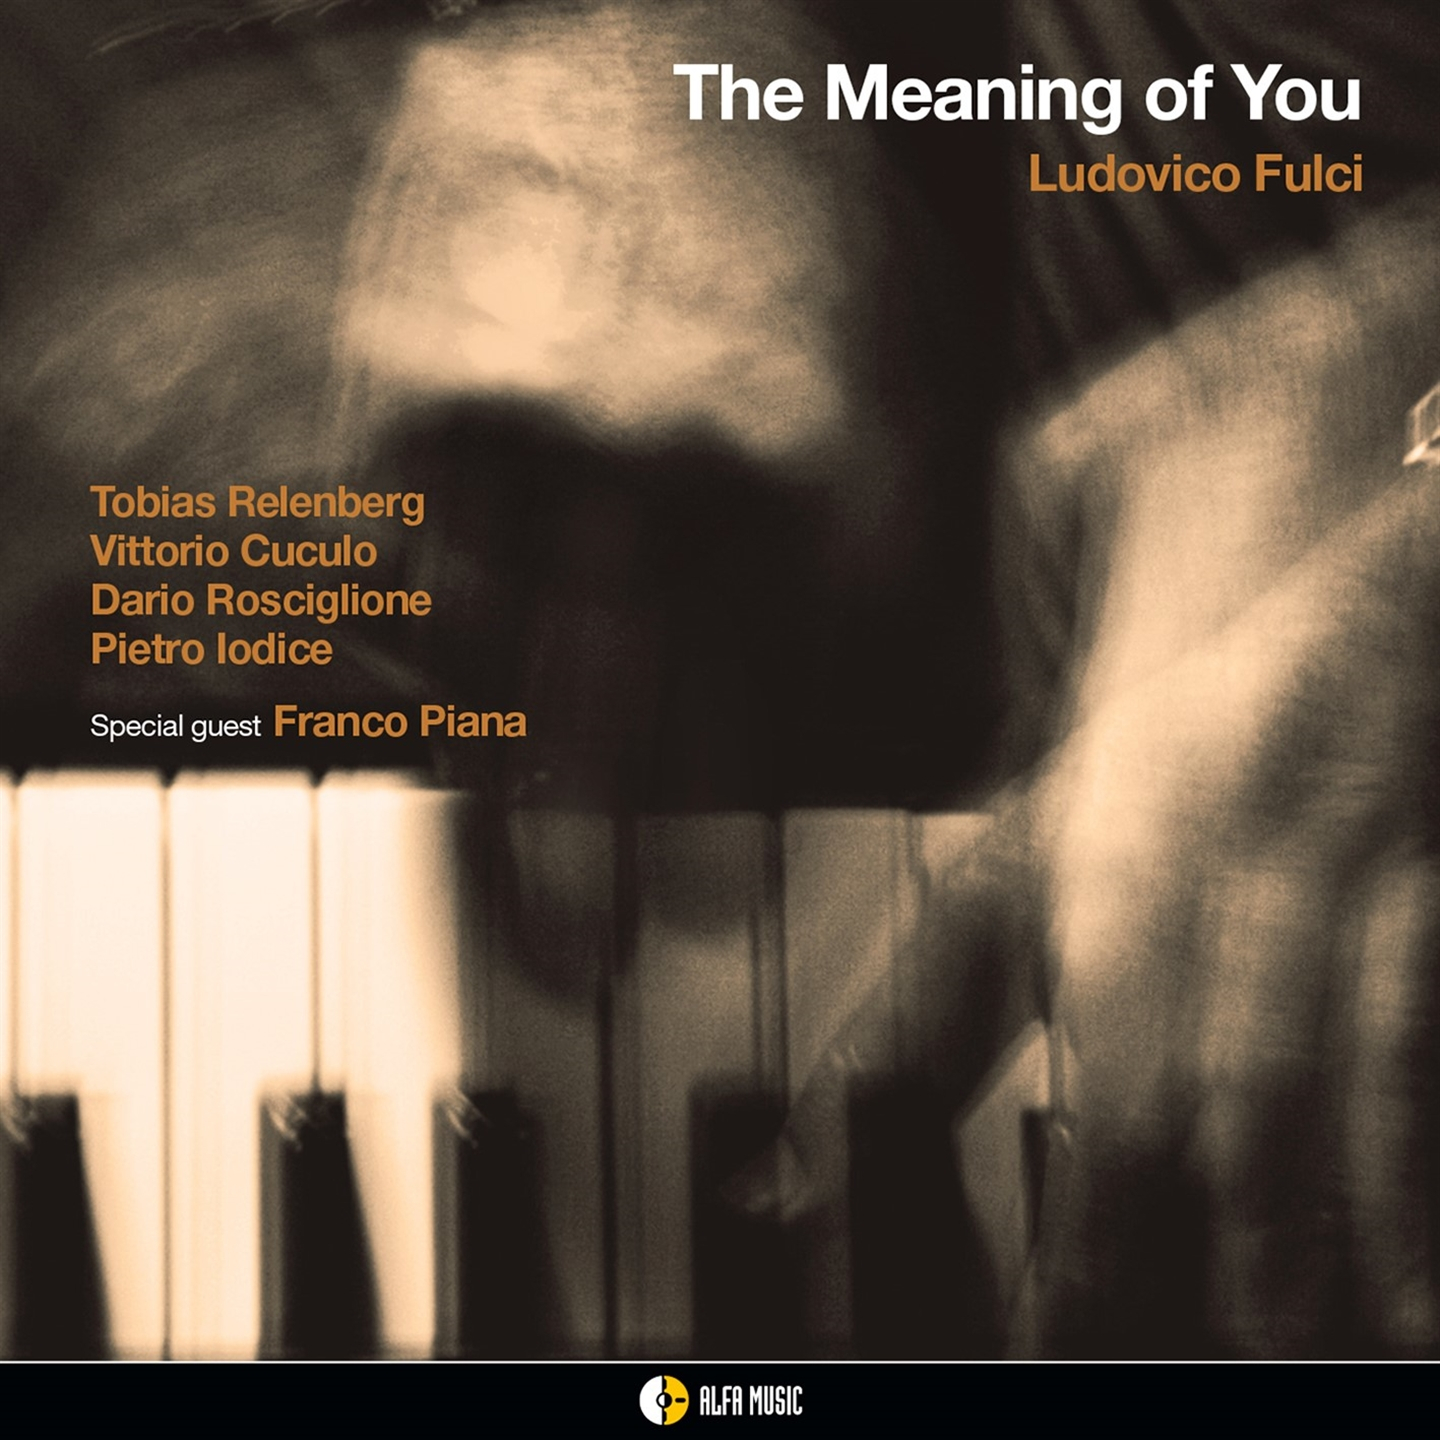 THE MEANING OF YOU